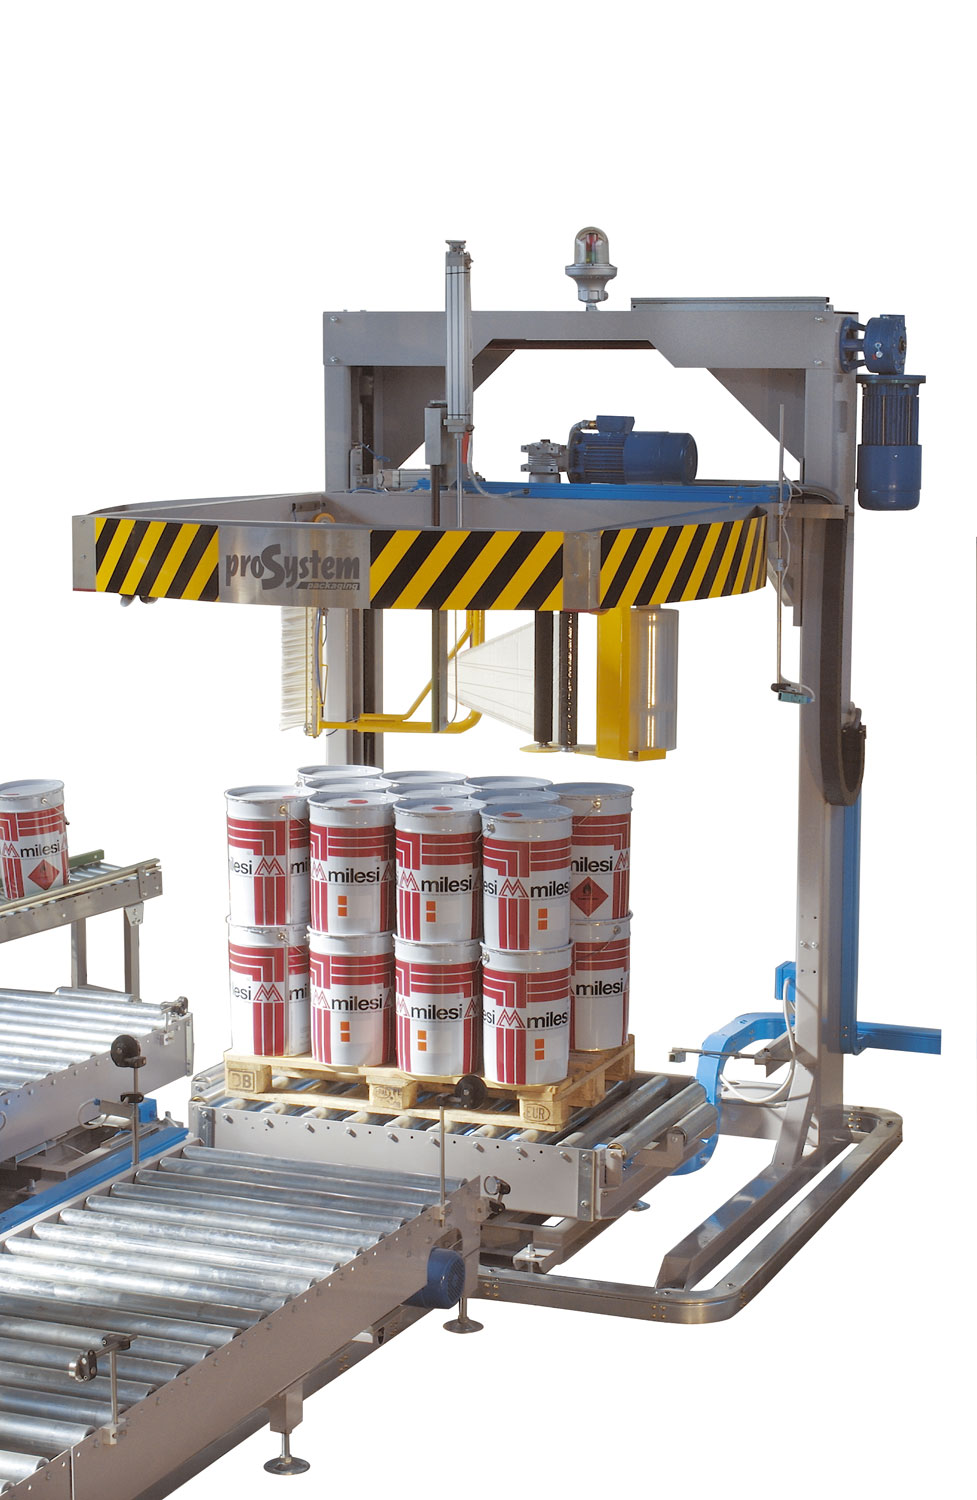 Prosystem, Pallet stretch wrapping machines